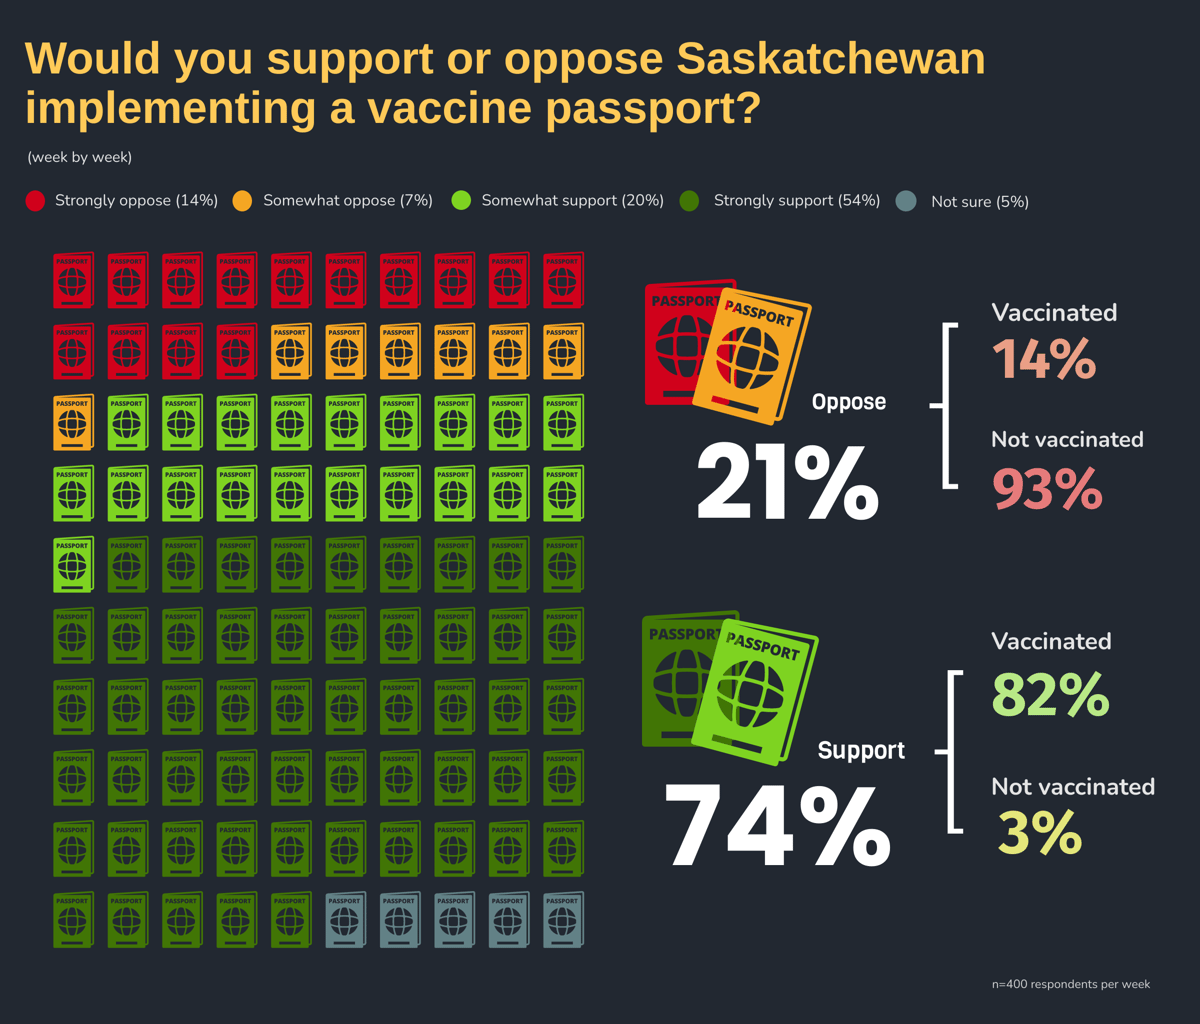 Would you support or oppose Saskatchewan implementing a vaccine passport?